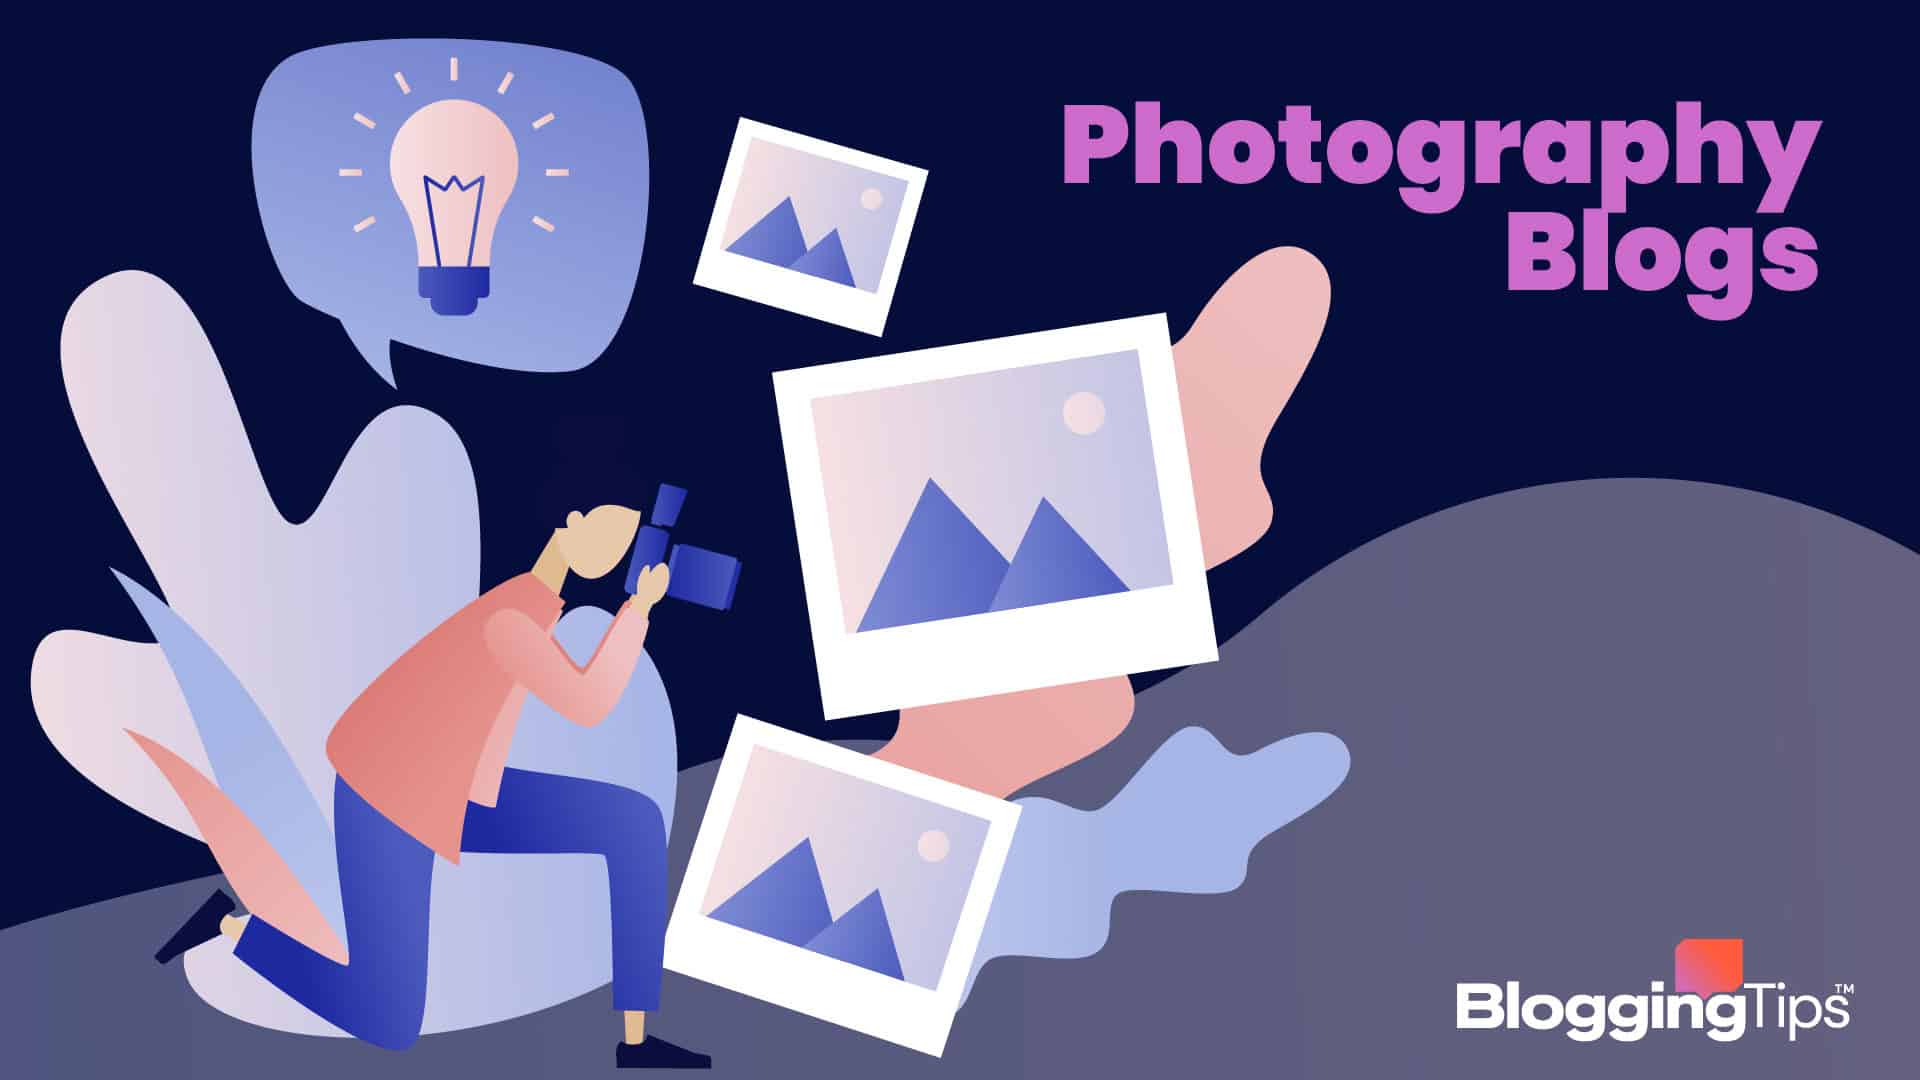 vector graphic showing an illustration of photography with the big block text 